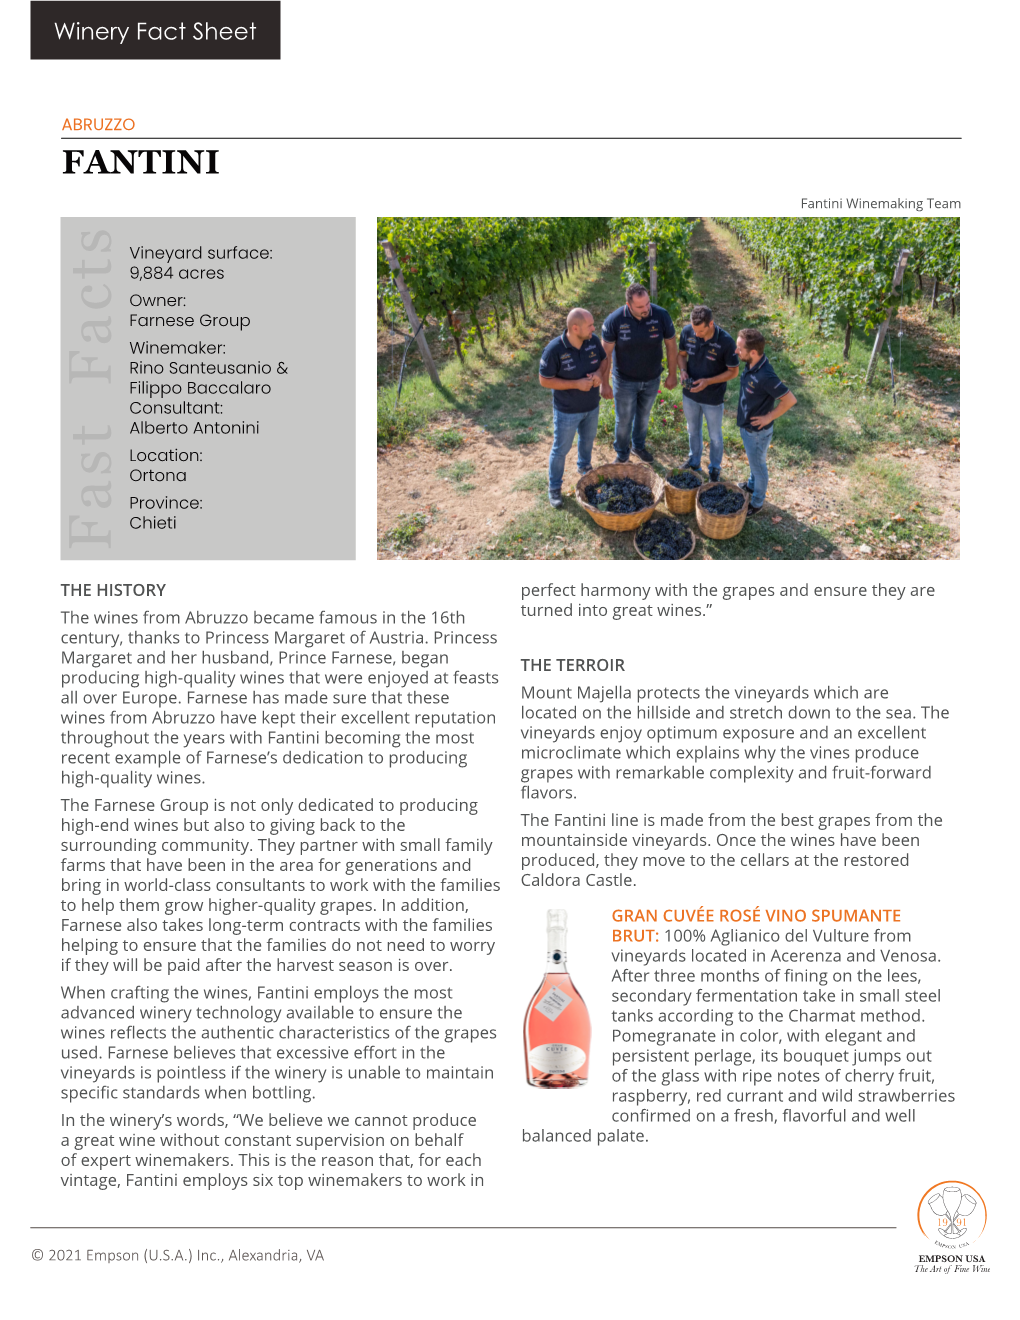 Download the Winery Fact Sheet